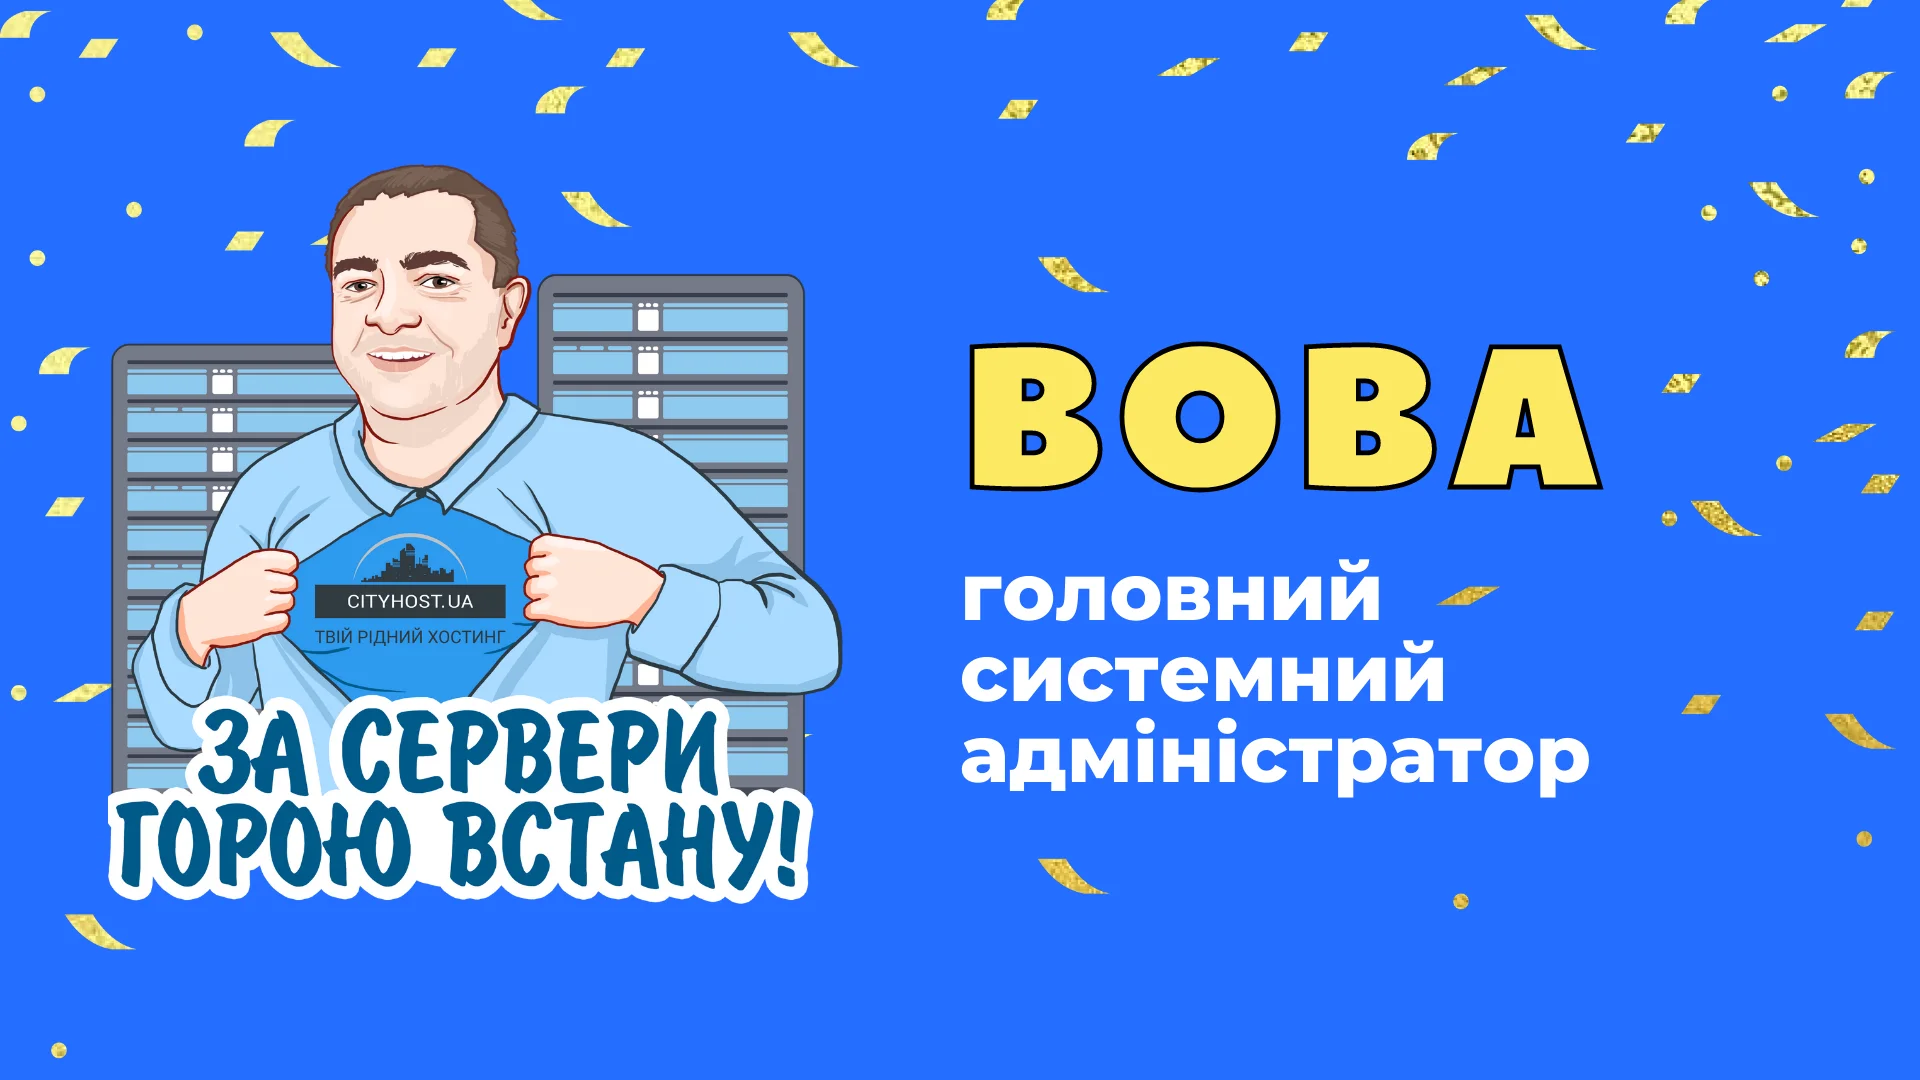 Vova is the main system administrator